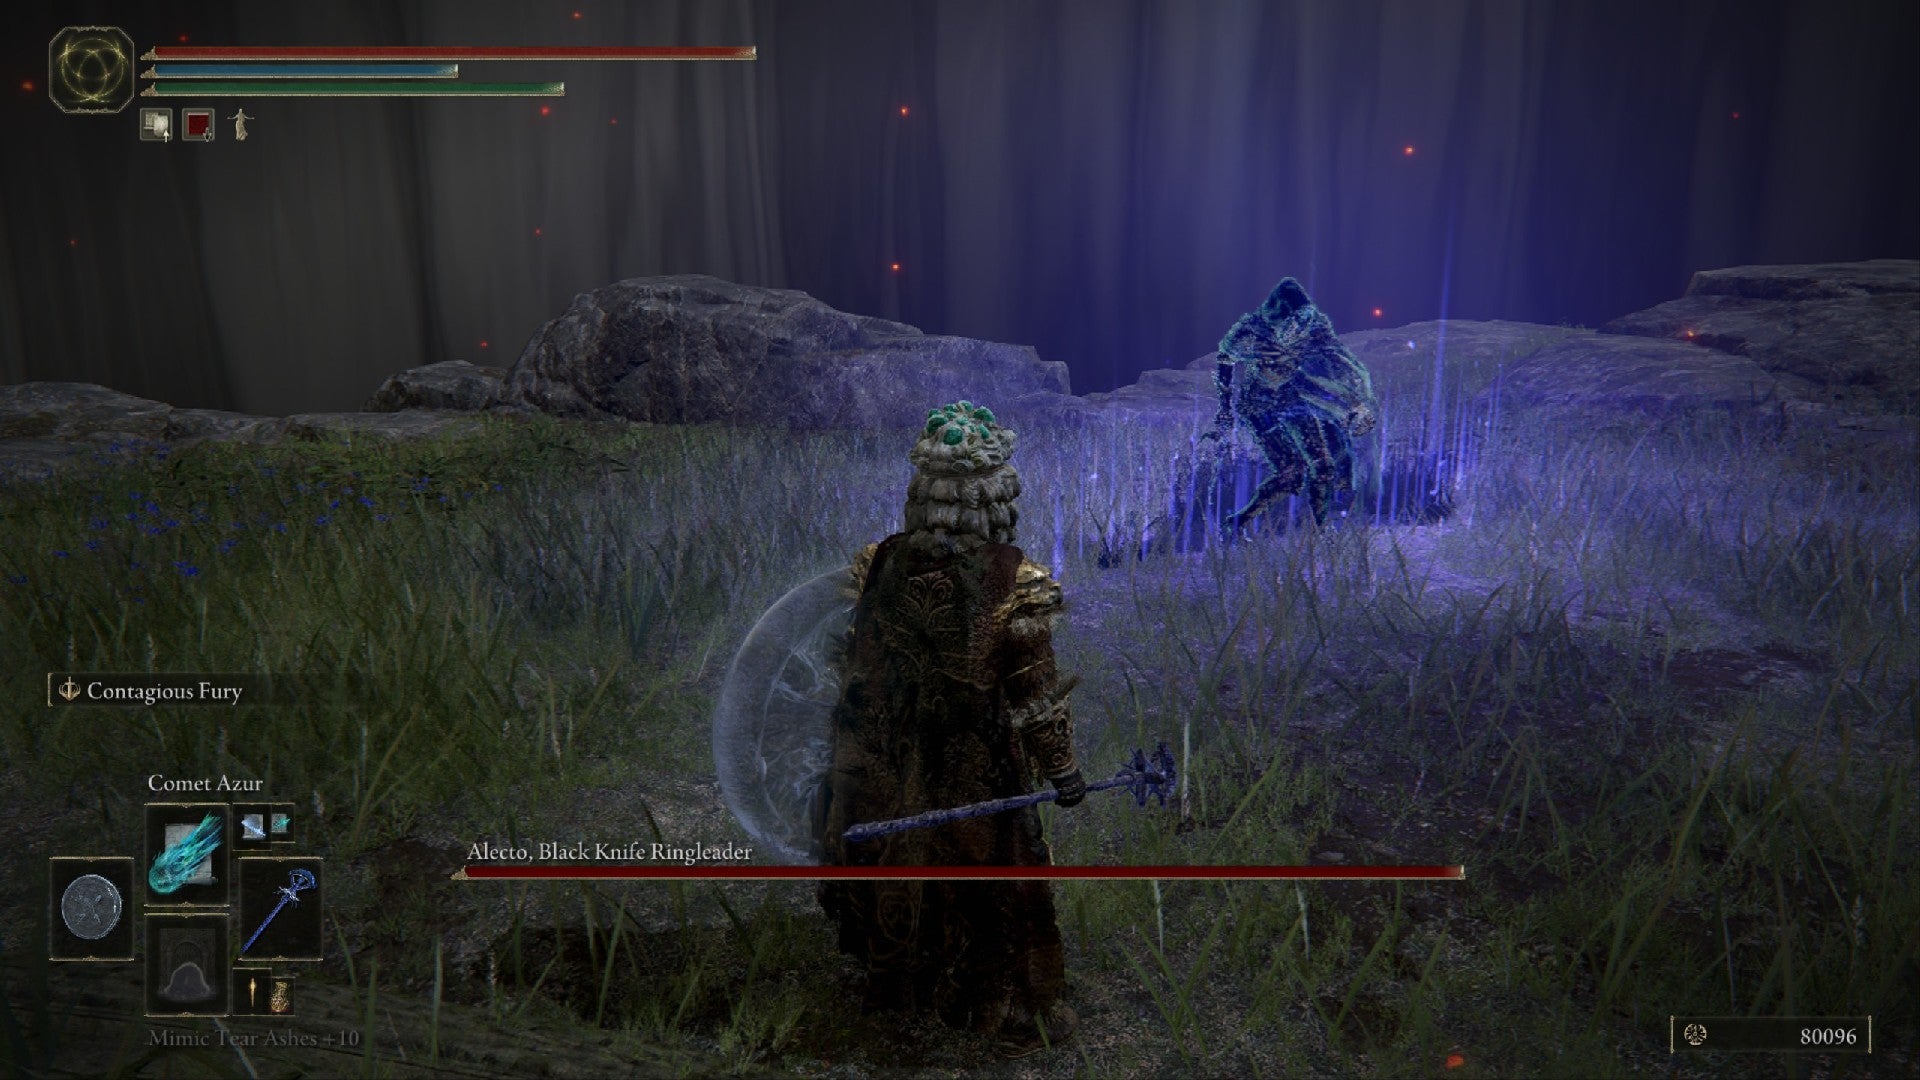 Elden Ring player faces into a purple rift as Alecto, Black Knife Ringleader, walks out wielding a blade and wearing an assassin's cloak